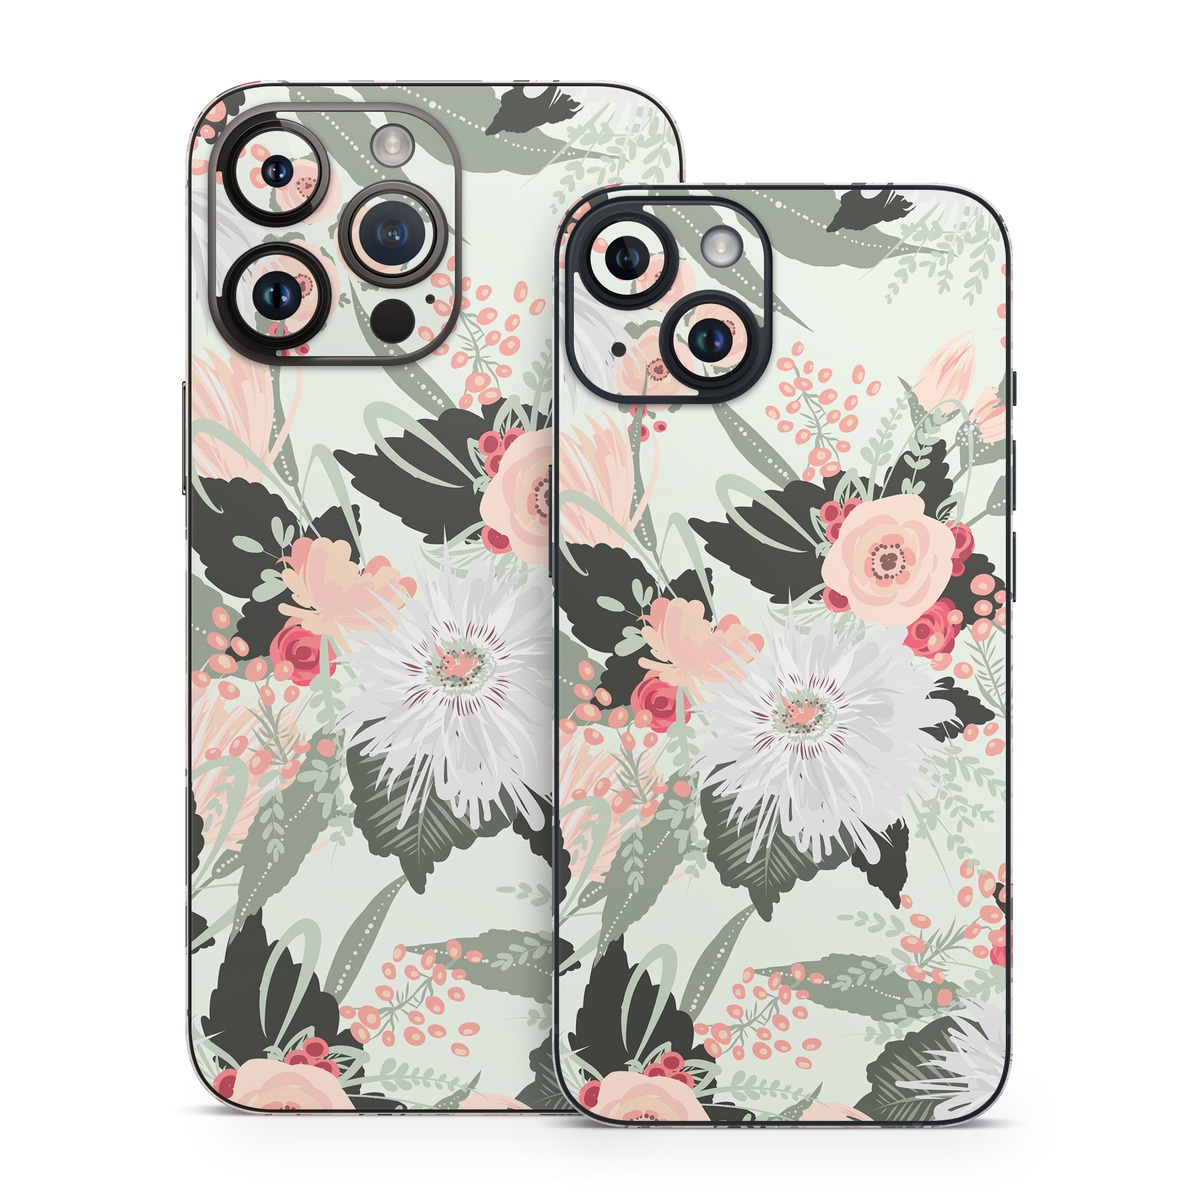 iPhone 14 Skin design of Pattern, Pink, Floral design, Design, Textile, Wrapping paper, Plant, Peach, Flower, with green, red, white, pink colors